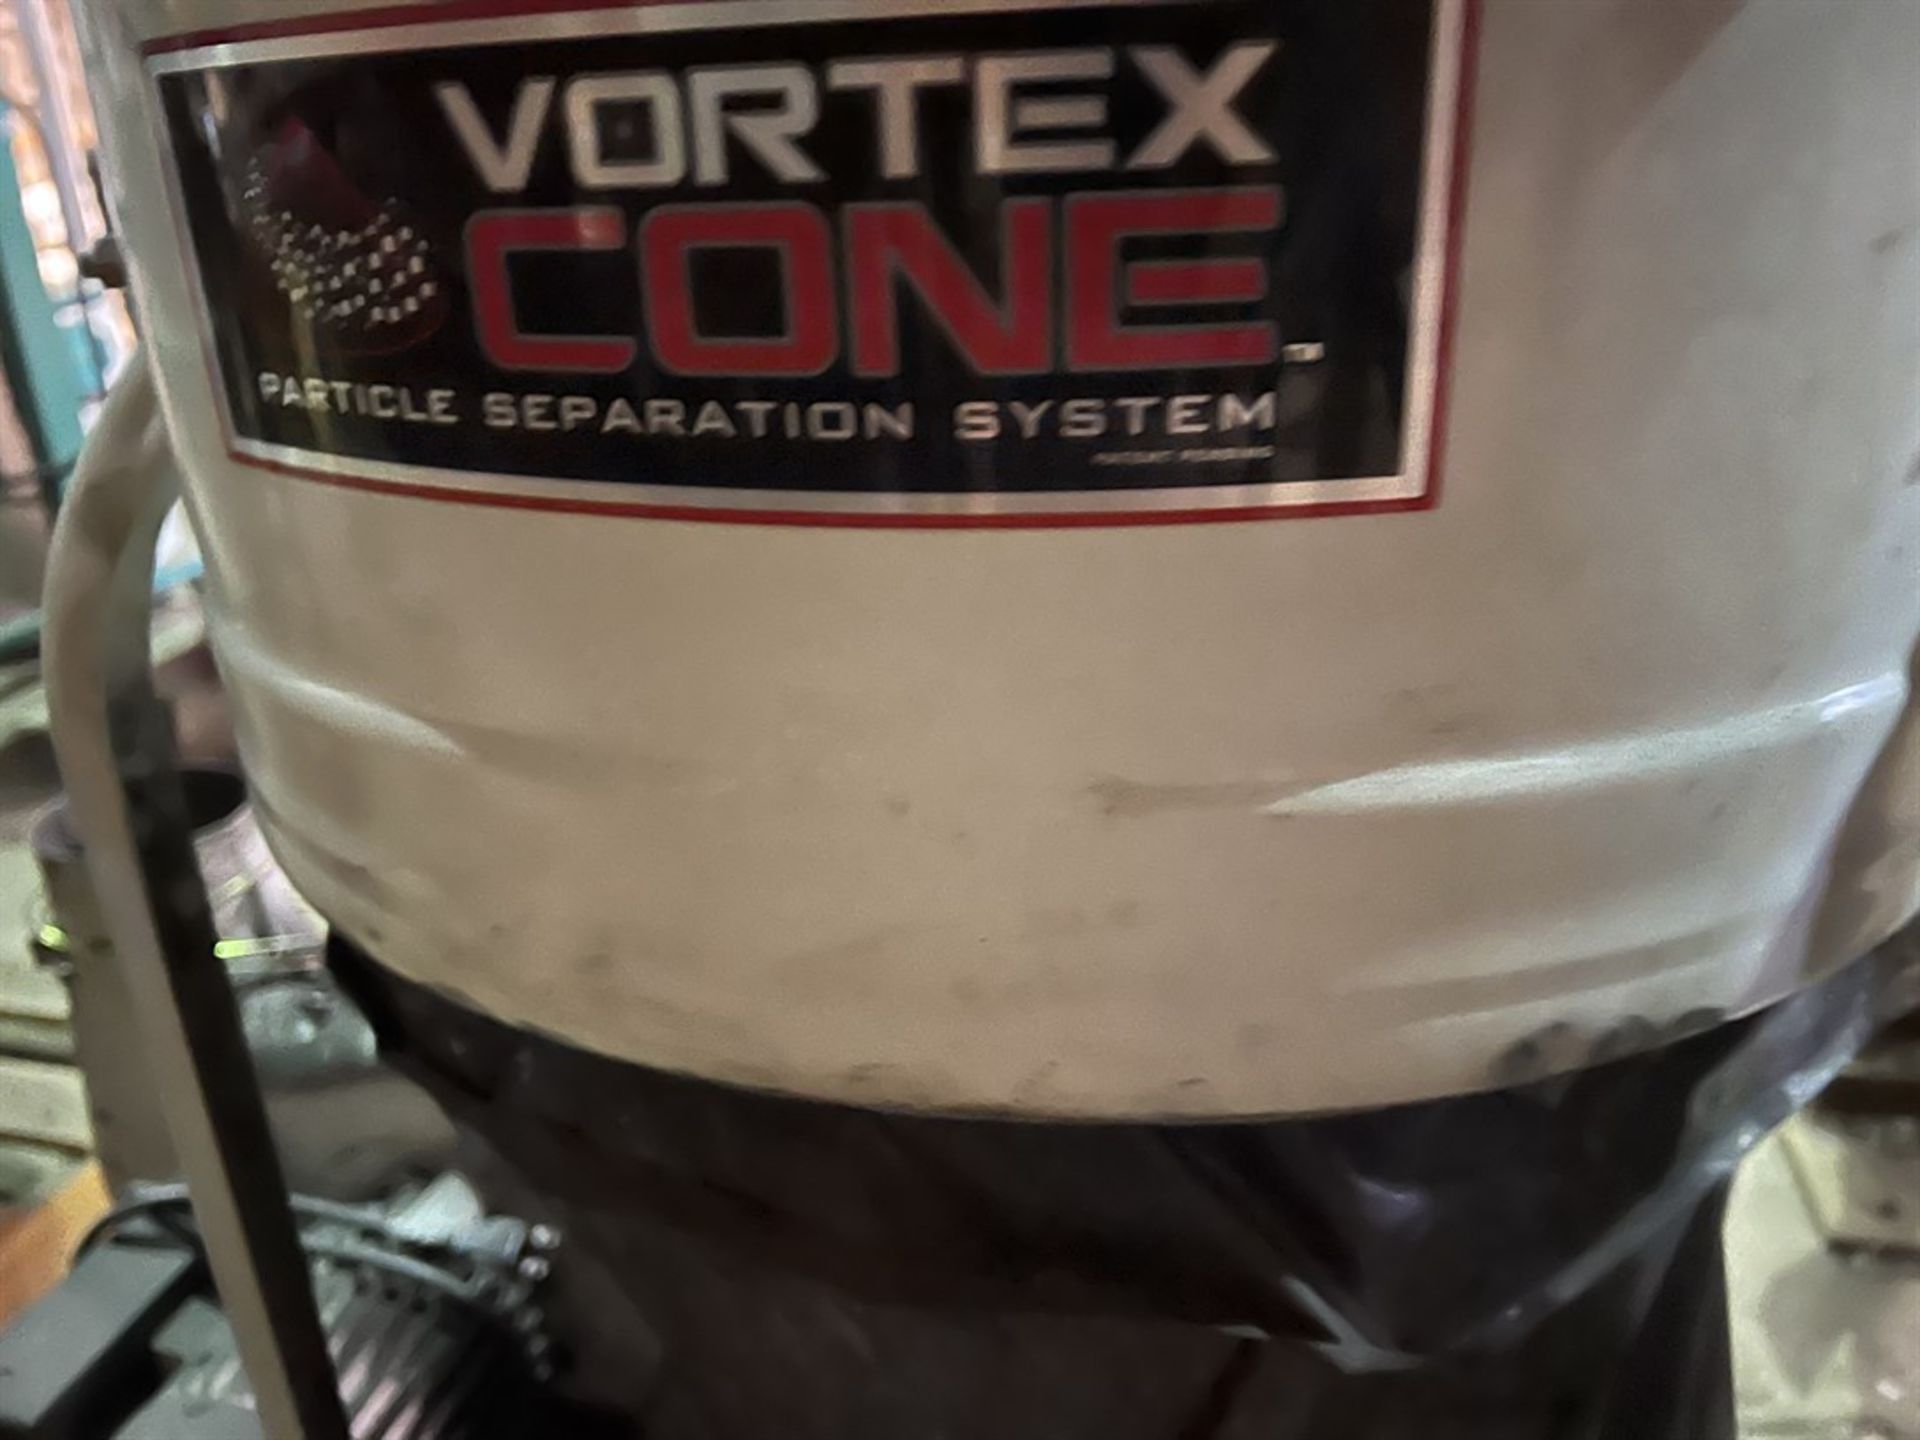 JET DC-1200VX Vortex Cone Dust Collector, s/n 19090625, 2 HP (Building 39) - Image 5 of 6